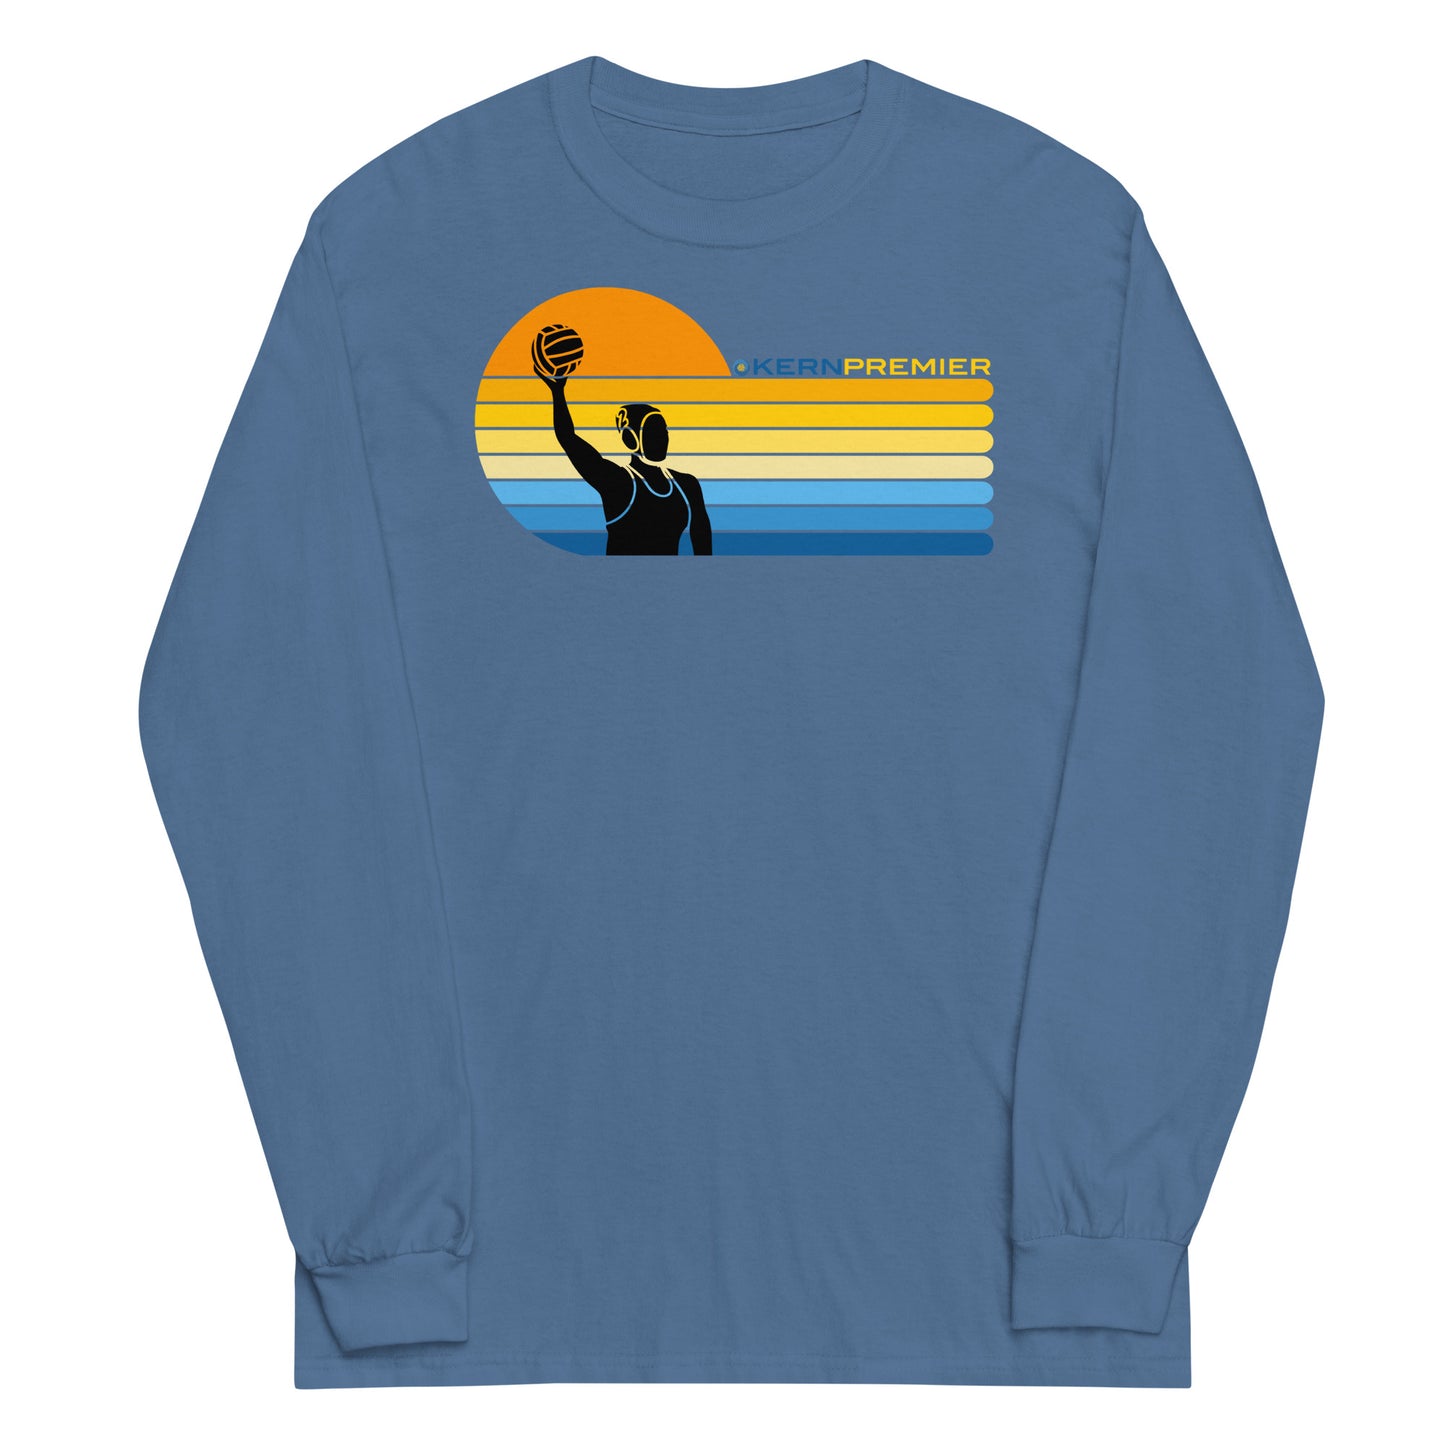 Kern Premier - 7 Color Left sided Sunset with Female Silhouette with Logo on Top - Long Sleeve Shirt - Gildan 2400